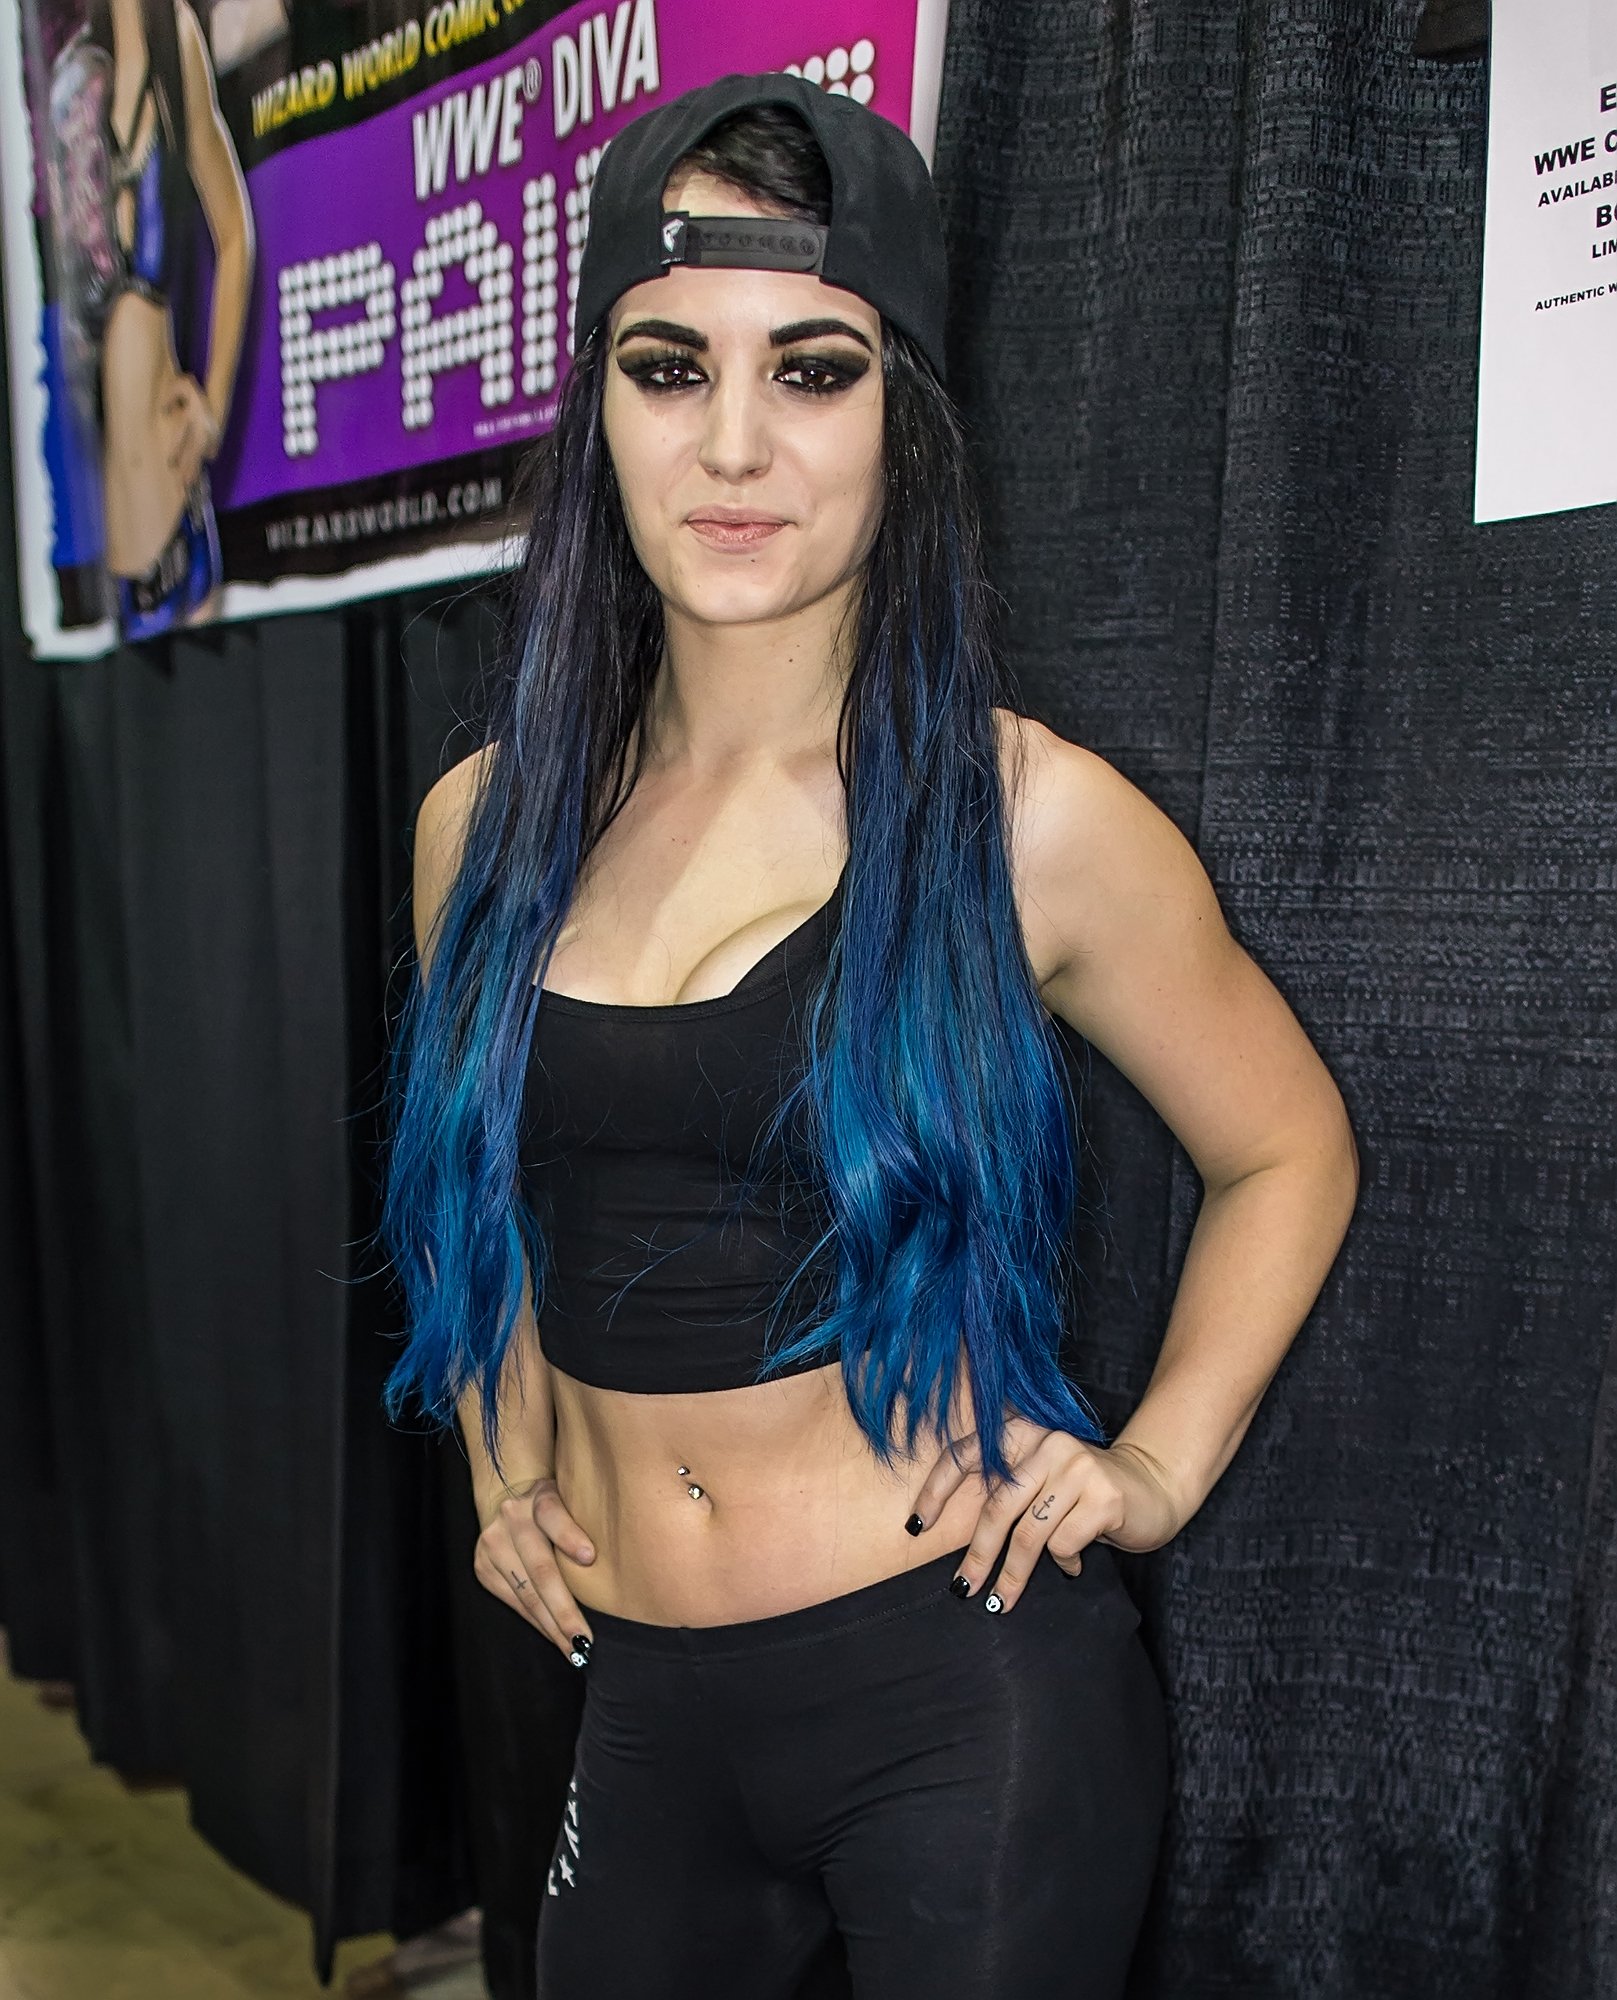 christy priebe recommends wwe paige pussy pic